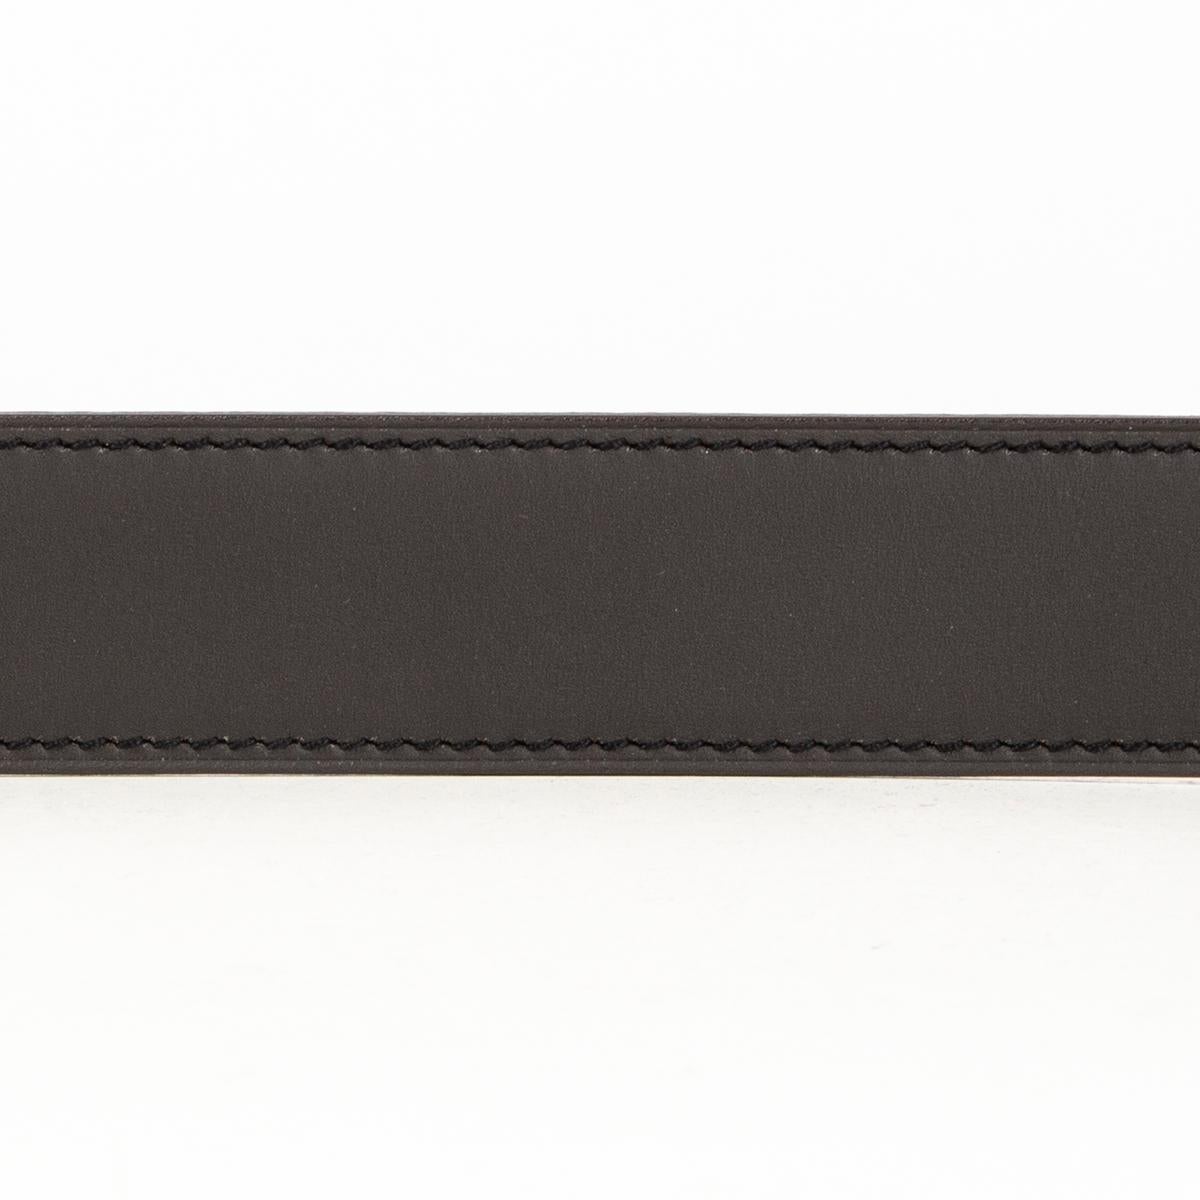 100% auth Hermes 32mm reversible belt strap in Fusain (dark brown) Sombrero and Potiron (orange) Veau Togo leather. Brand new. Comes with box.

Measurements
Tag Size	80
Width	3.2cm (1.2in)
Fits	77cm (30in) to 82cm (32in)

All our listings include